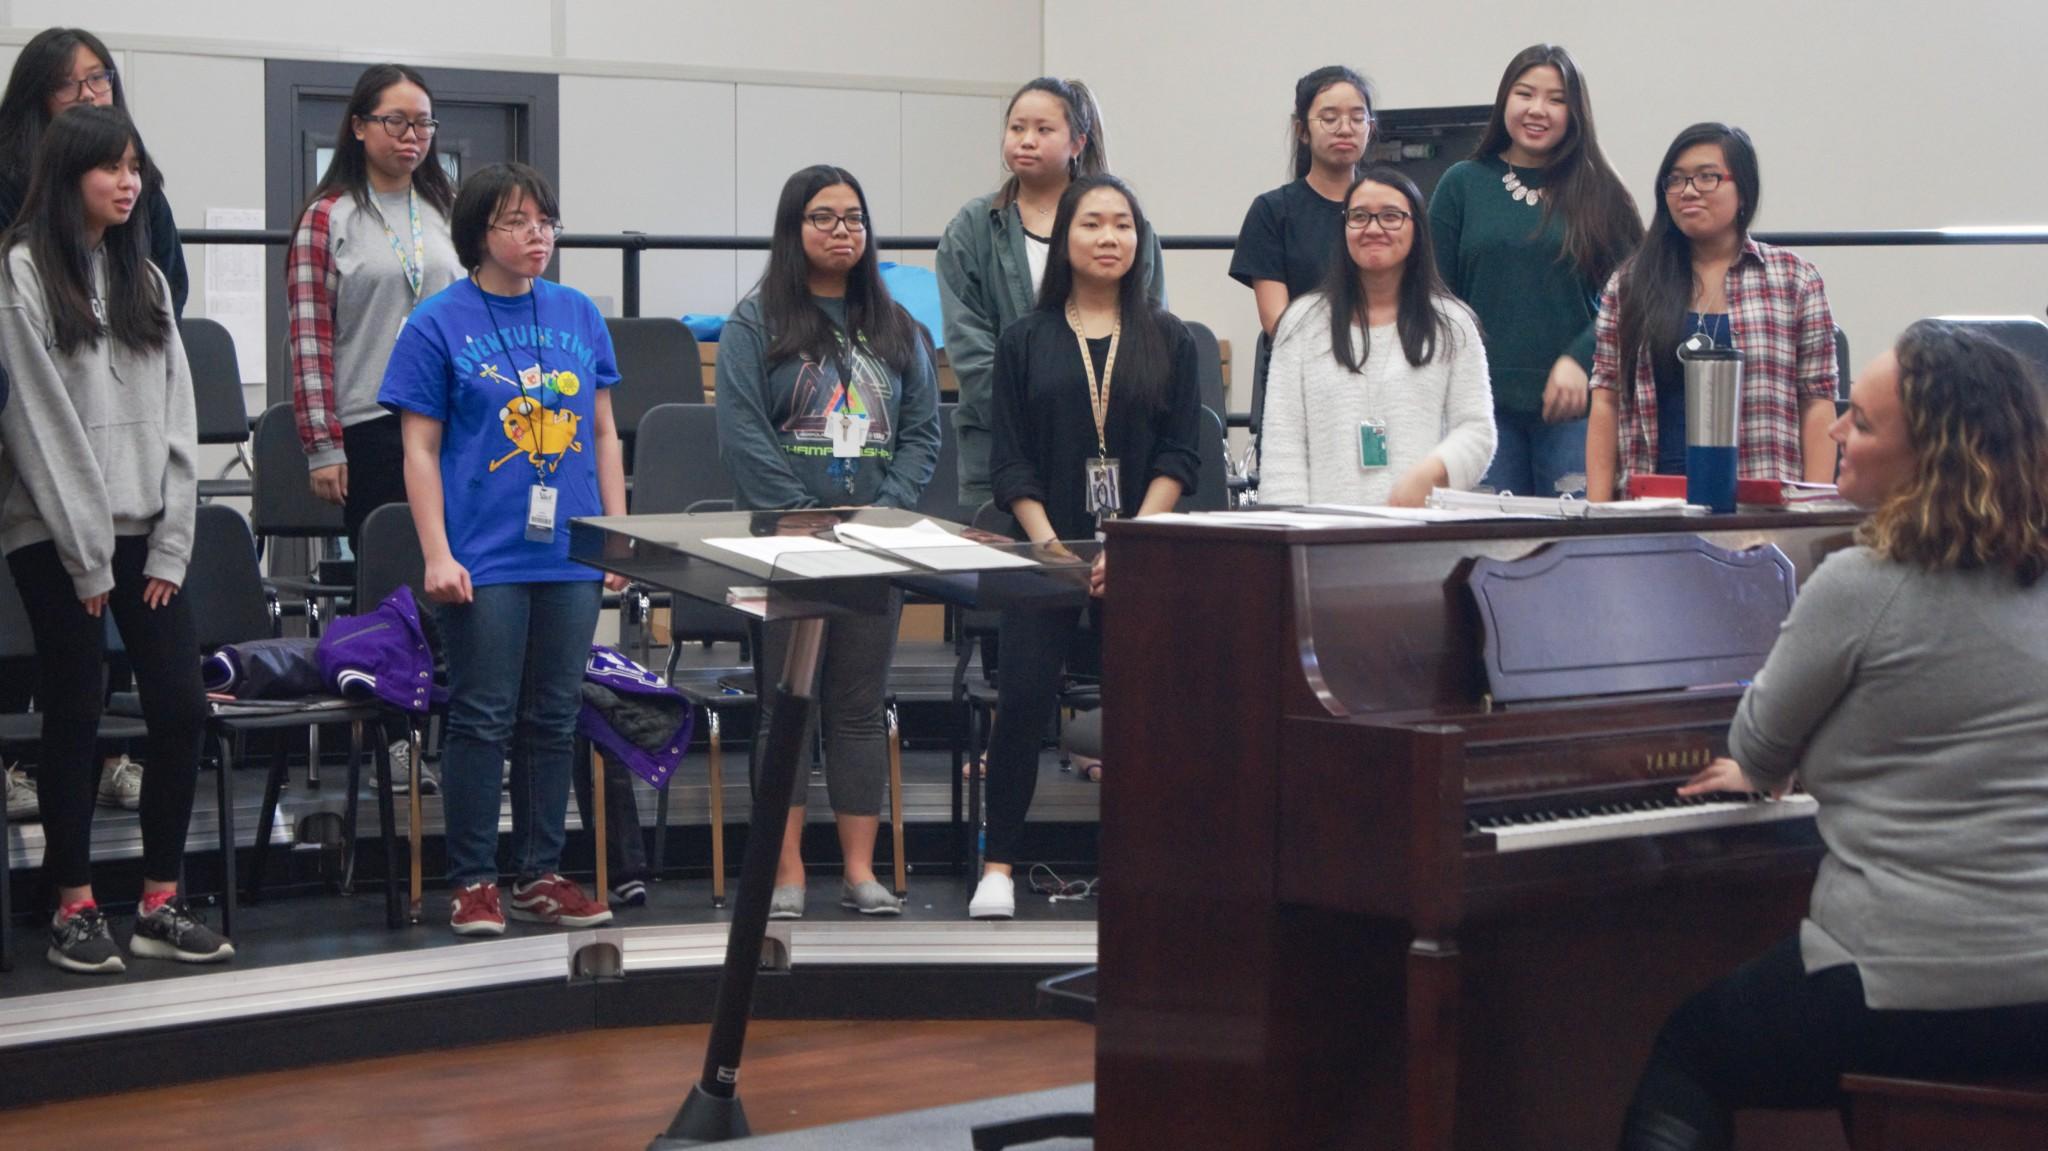 Ms. Winslow is working with her students to practice for their UIL songs Hello Girls by Pfaustch, Tota Pulchra Es by Durufle, and The Lake Isle of Innisfree by Daley.